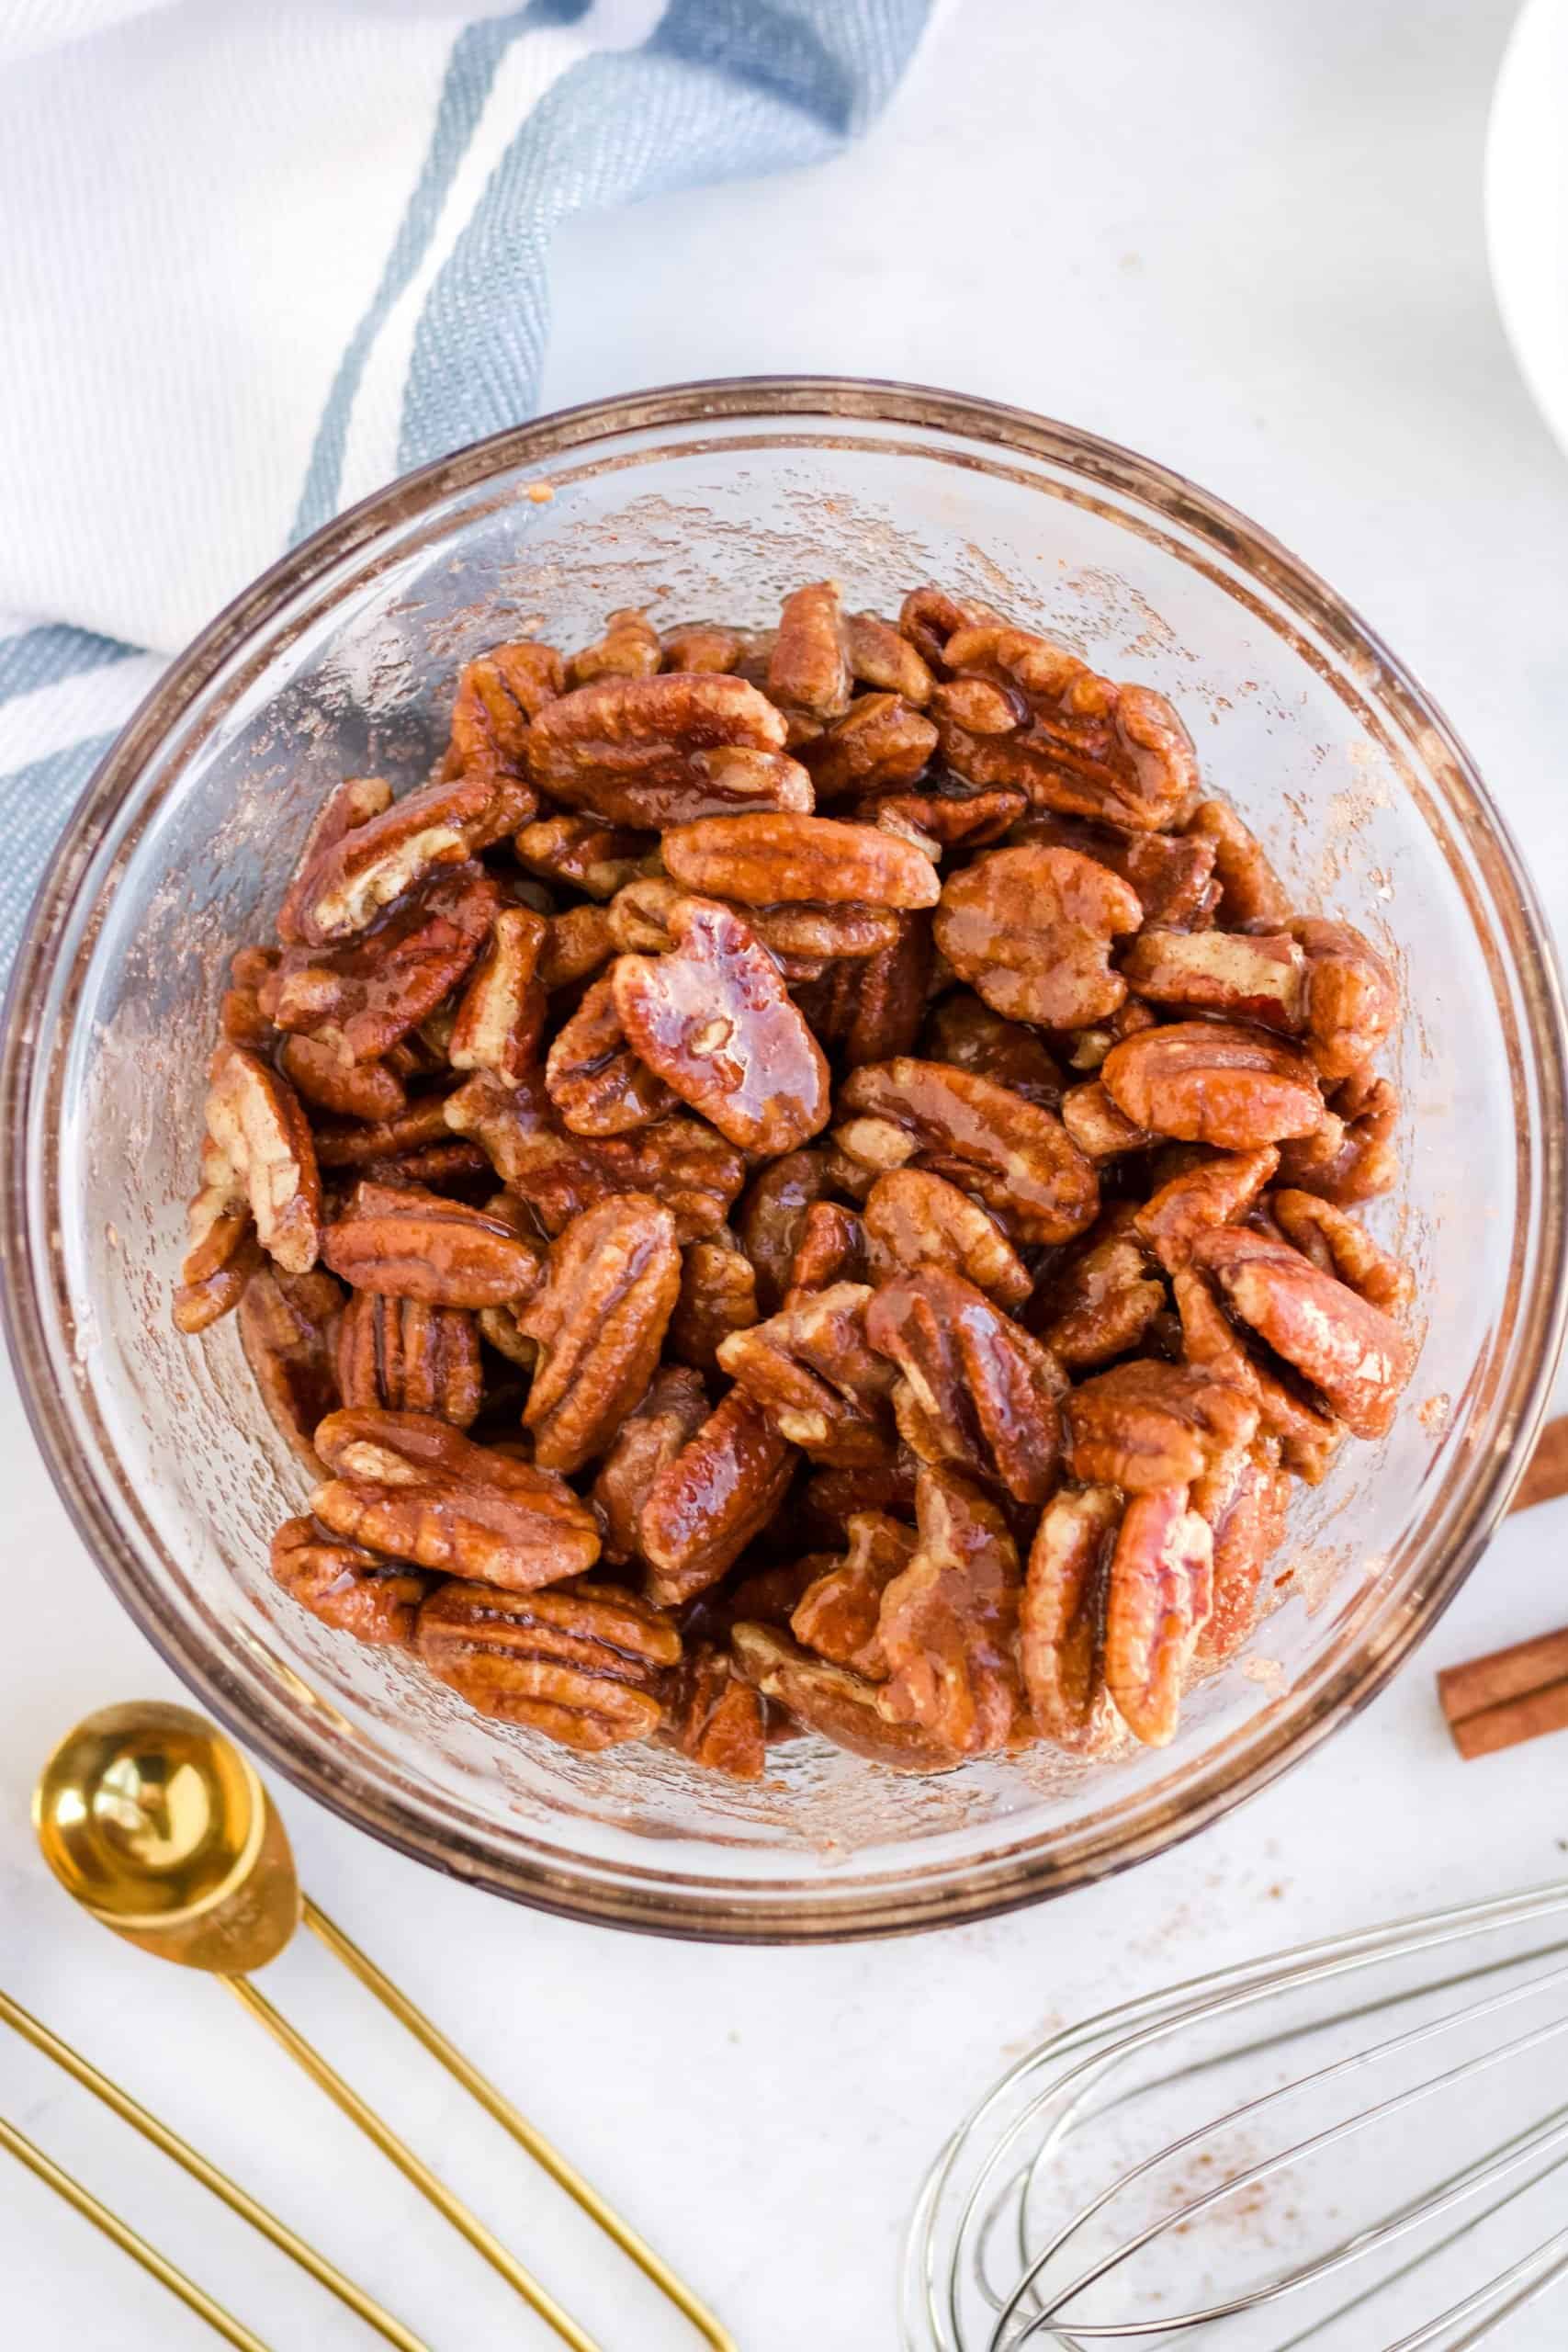 fully coated and seasoned pecan halves in a clear bowl.